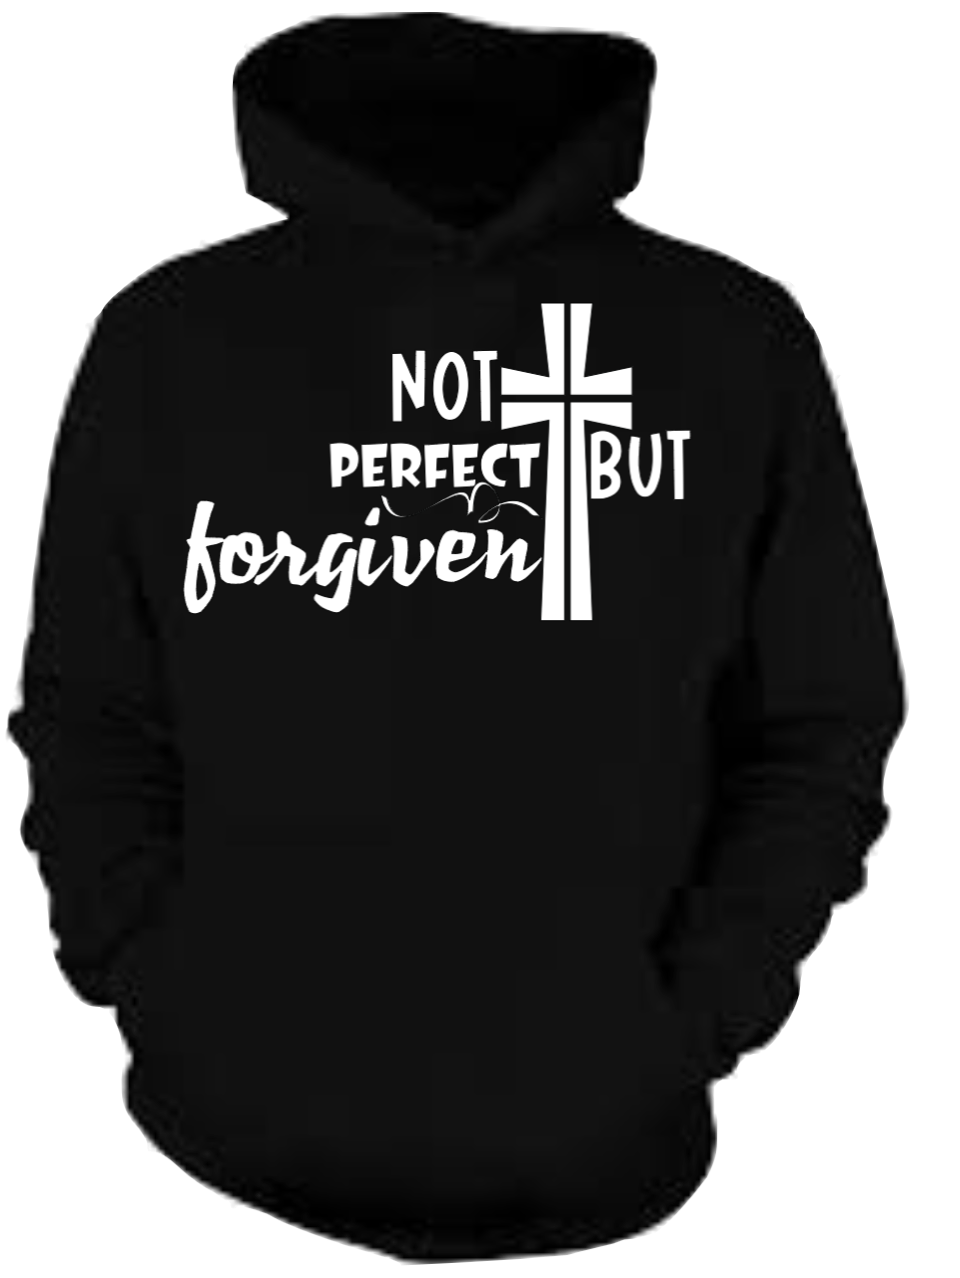 Not Perfect But Forgiven Hoodie (Unisex M/W)